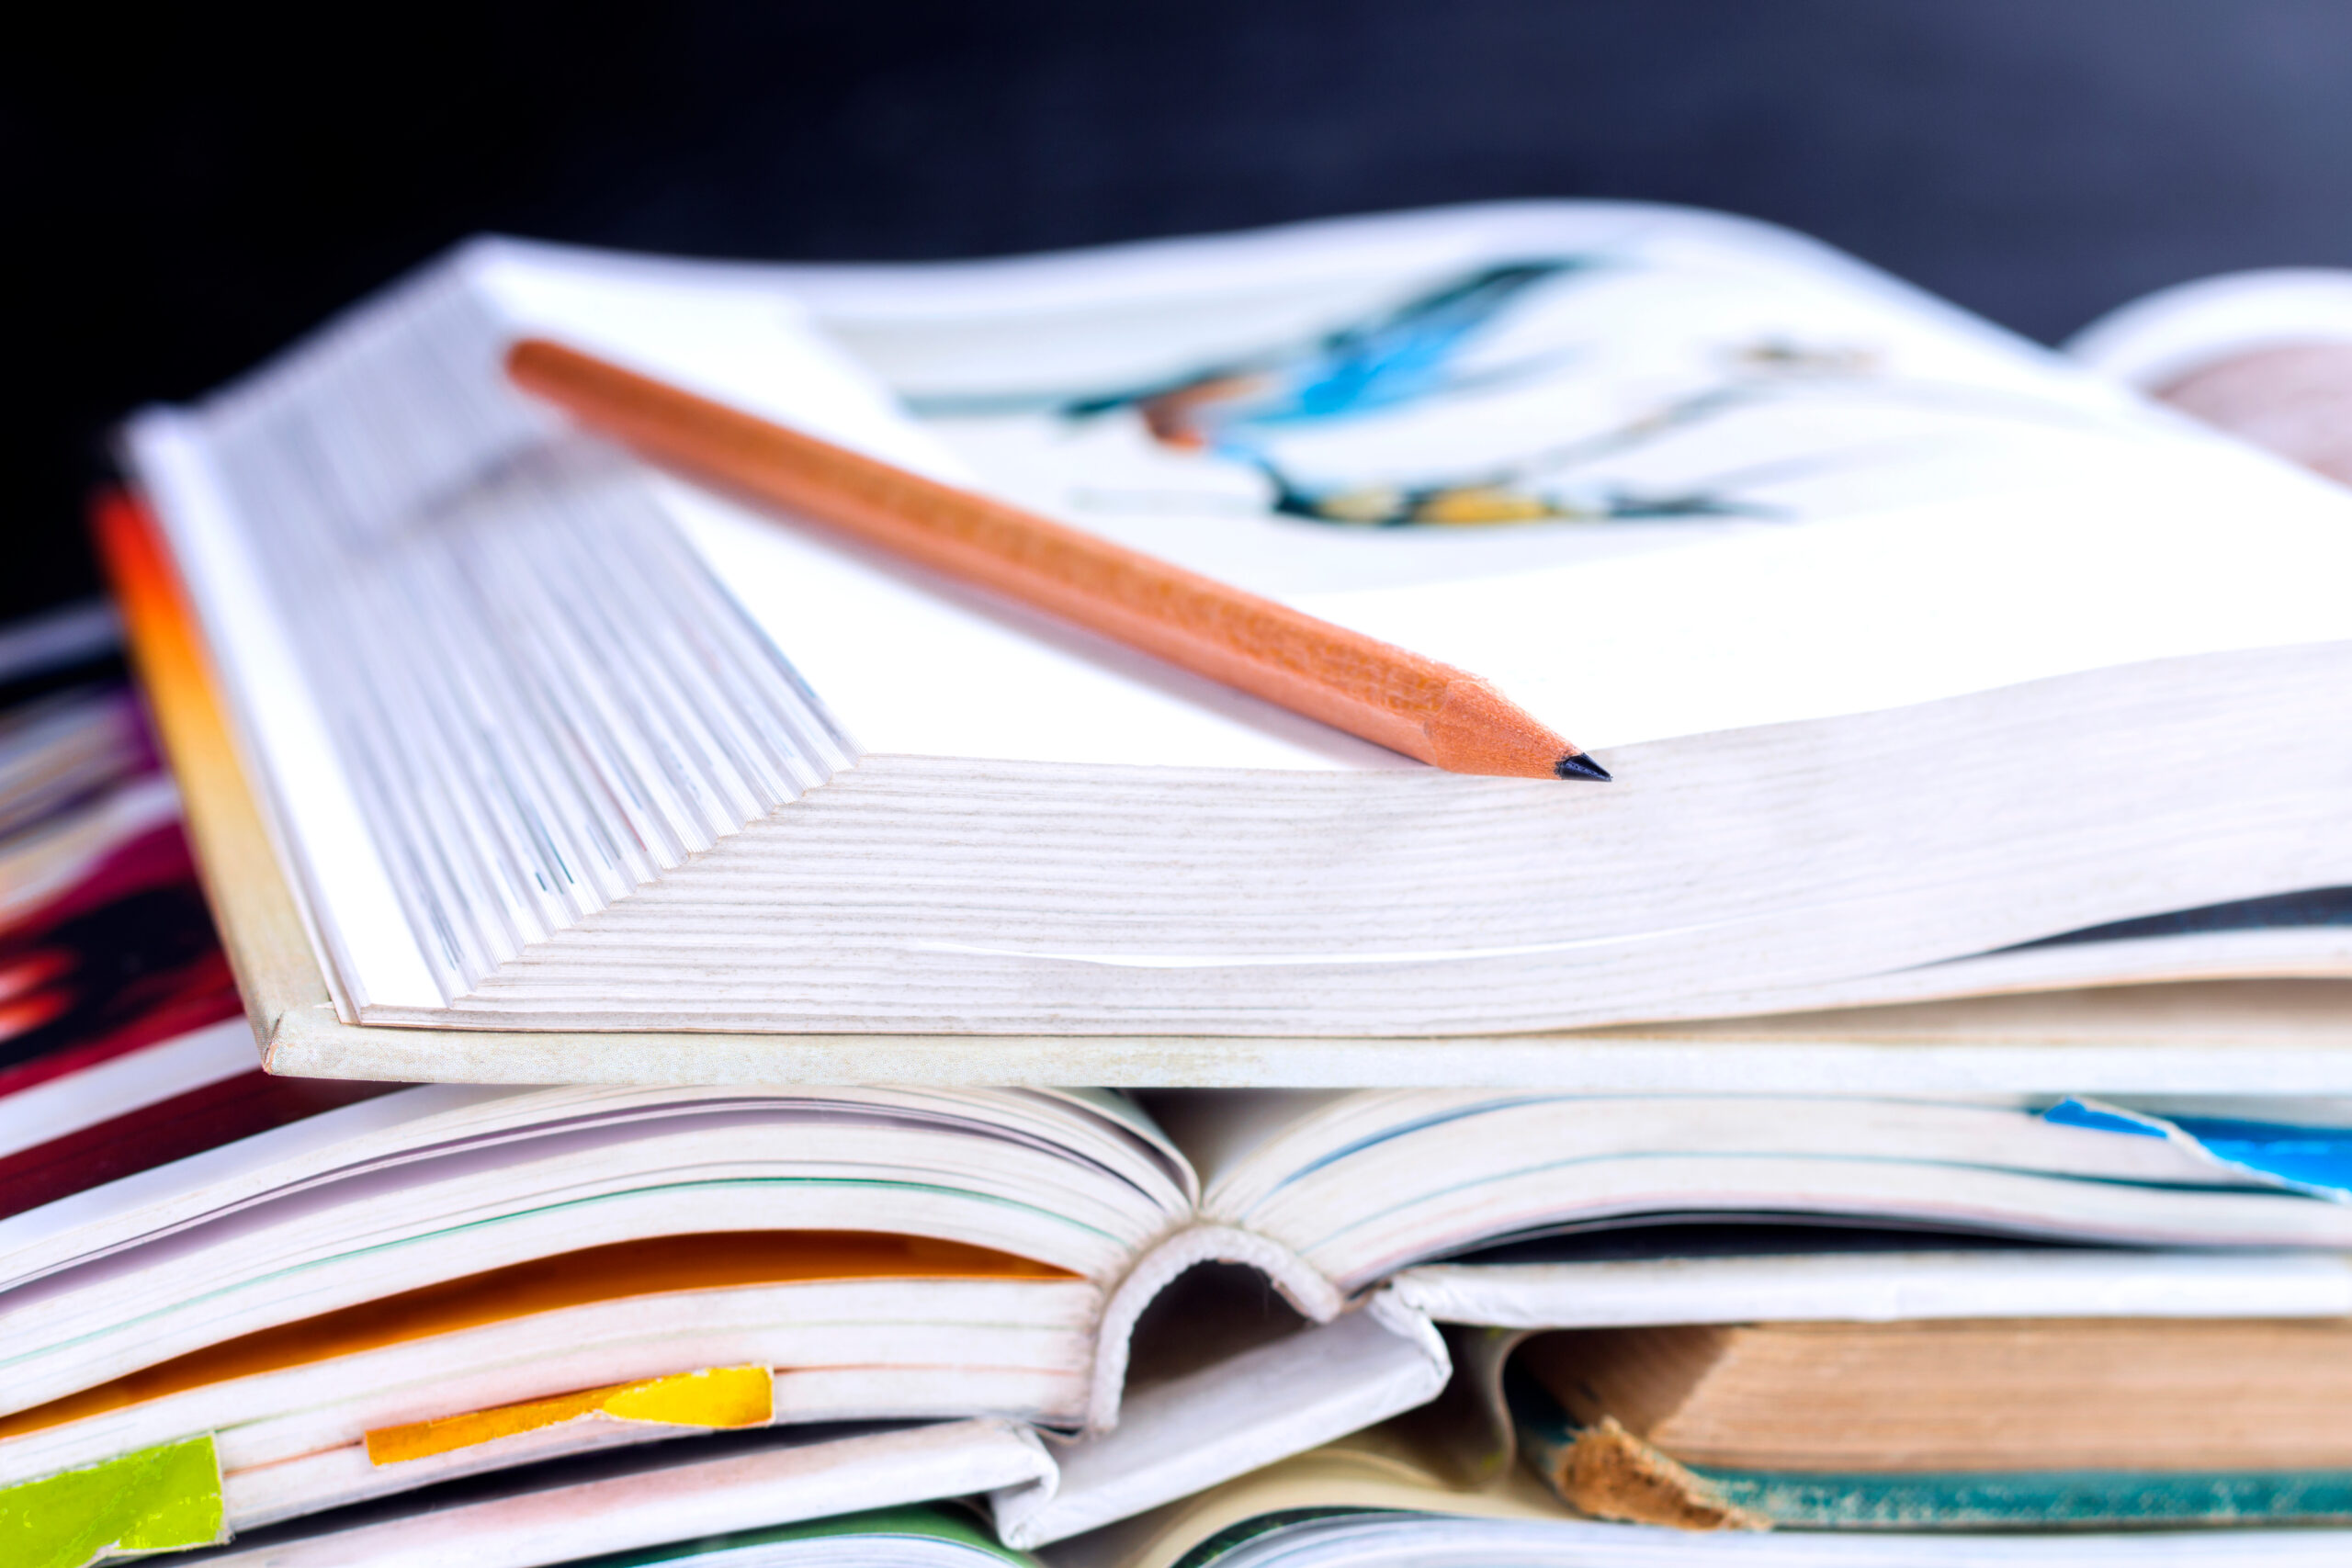 A haphazard pile of open, used textbooks, seen from the top edge of the books, with a pencil across the open page of the top textbook.